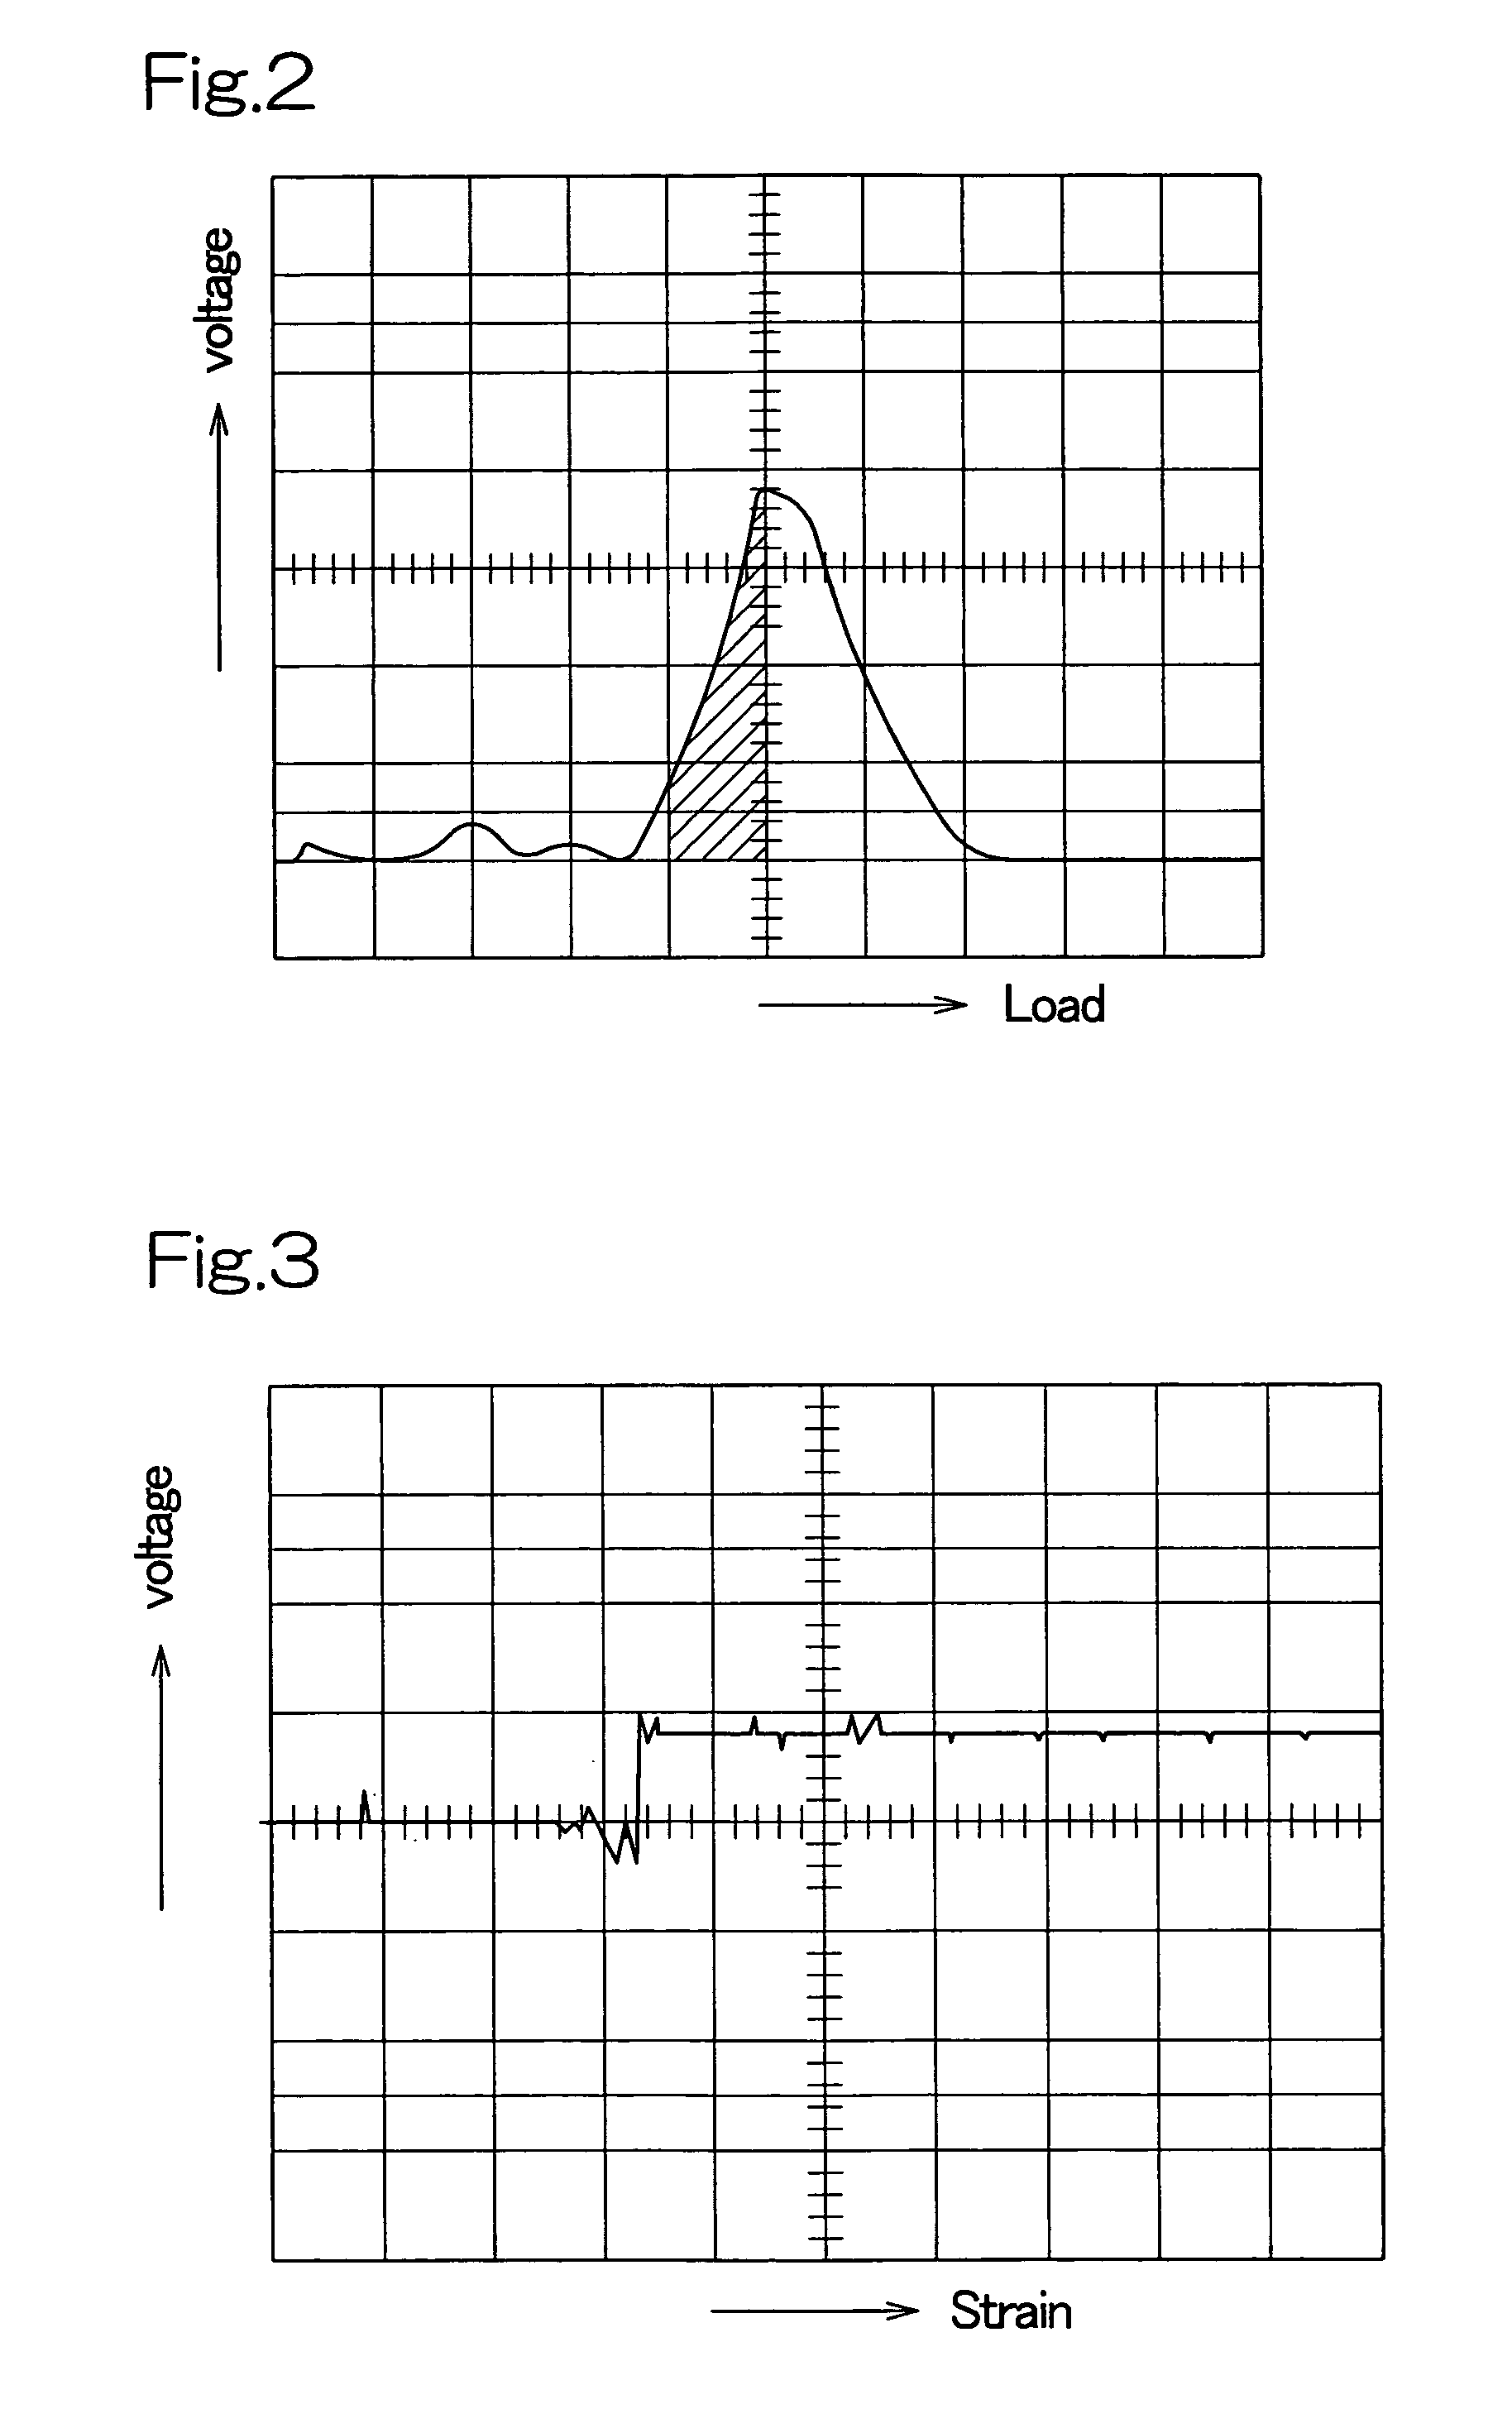 Bearing device for wheel